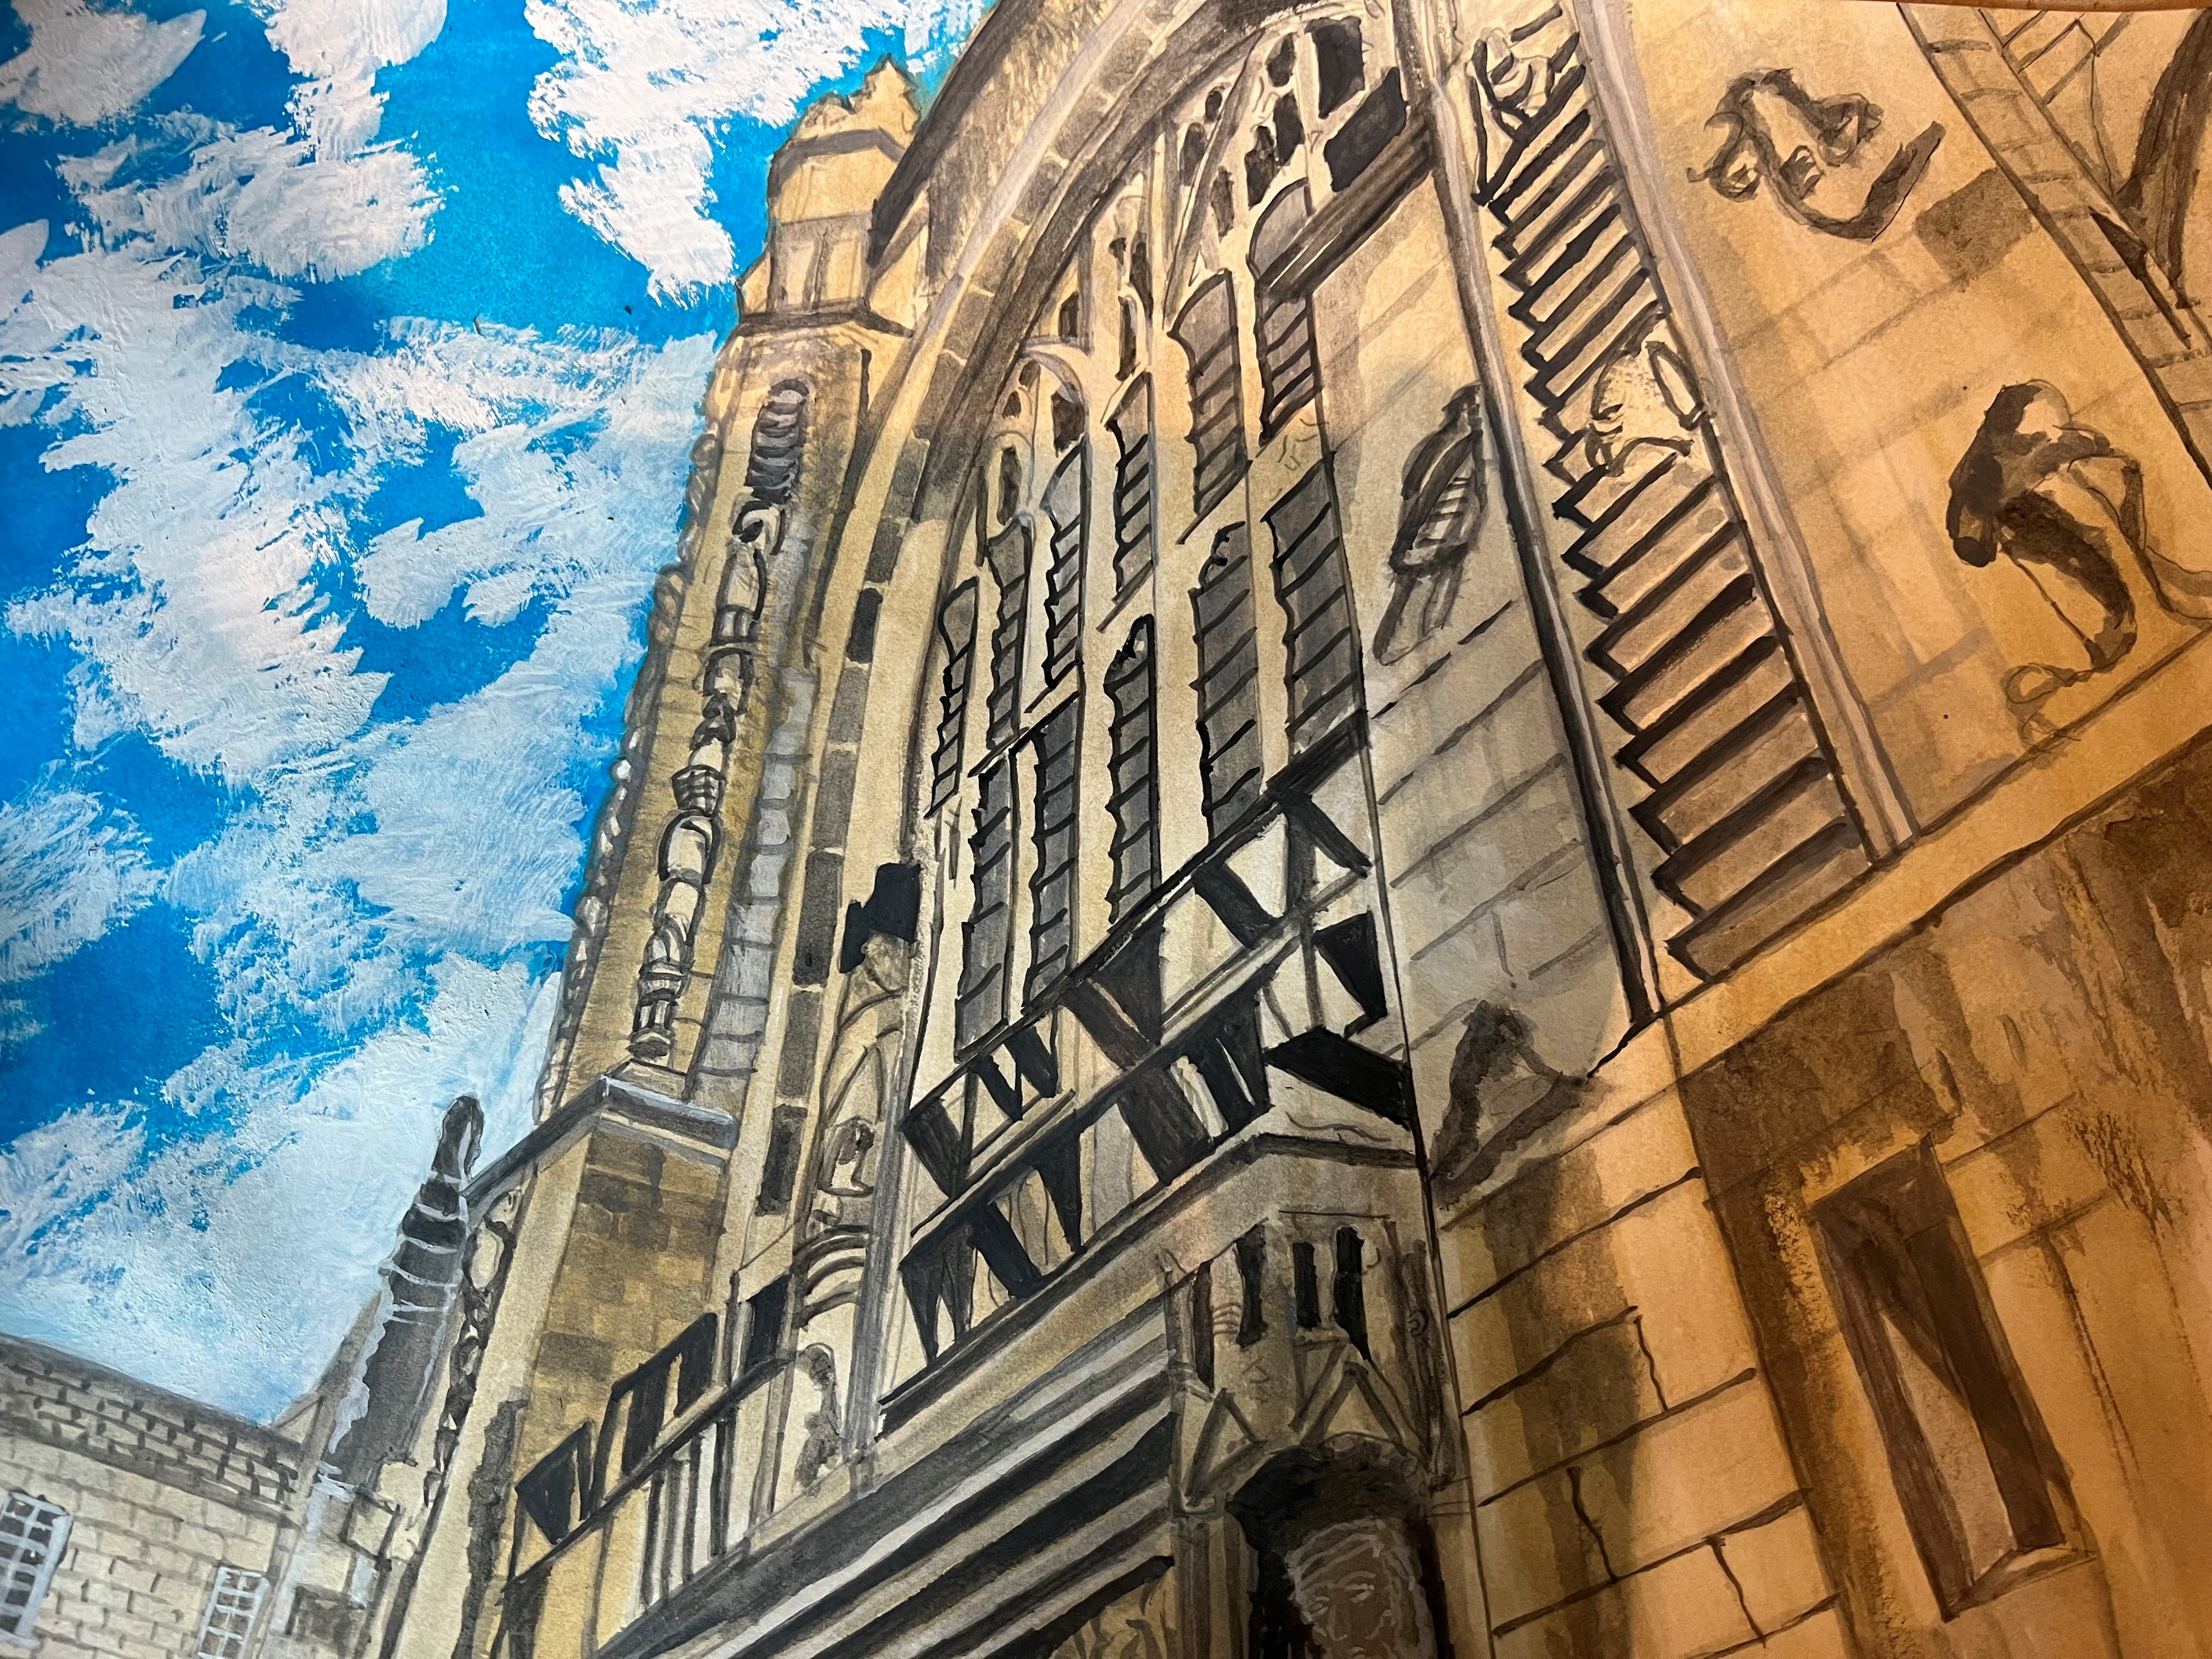 My painting of the west front of Bath Abbey Church in England